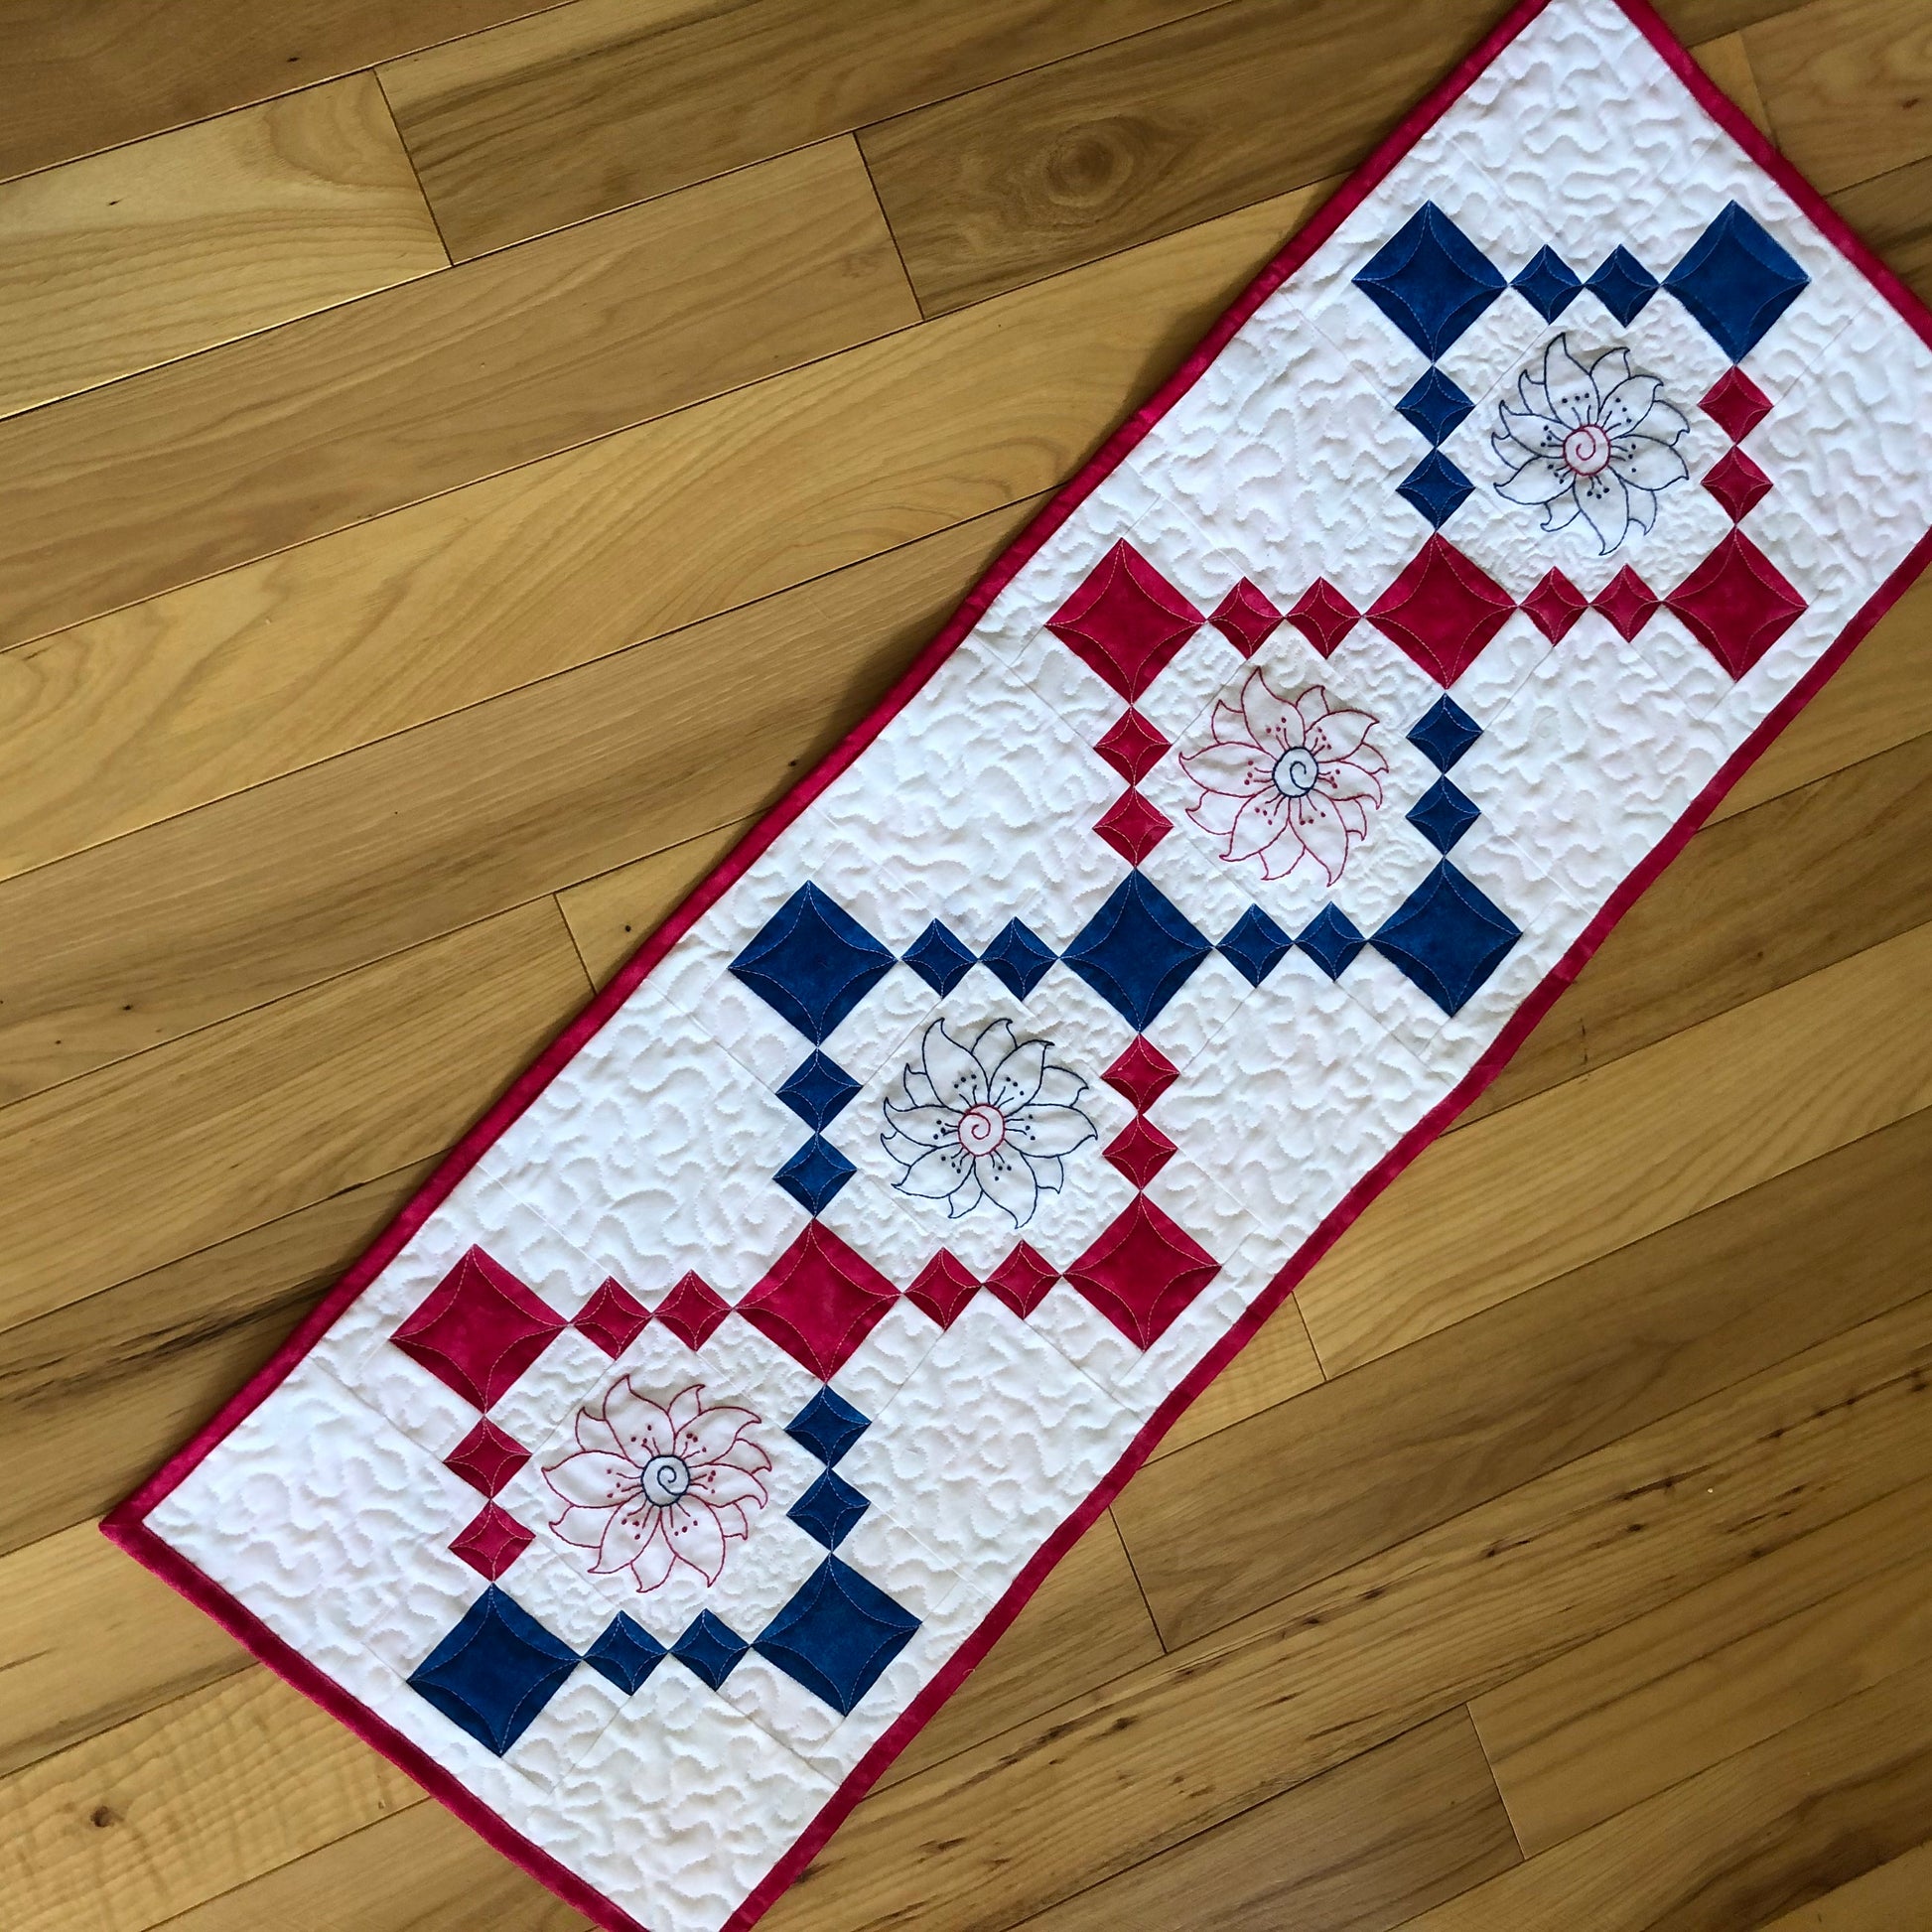 pink and blue table runner with embroidered flowers.